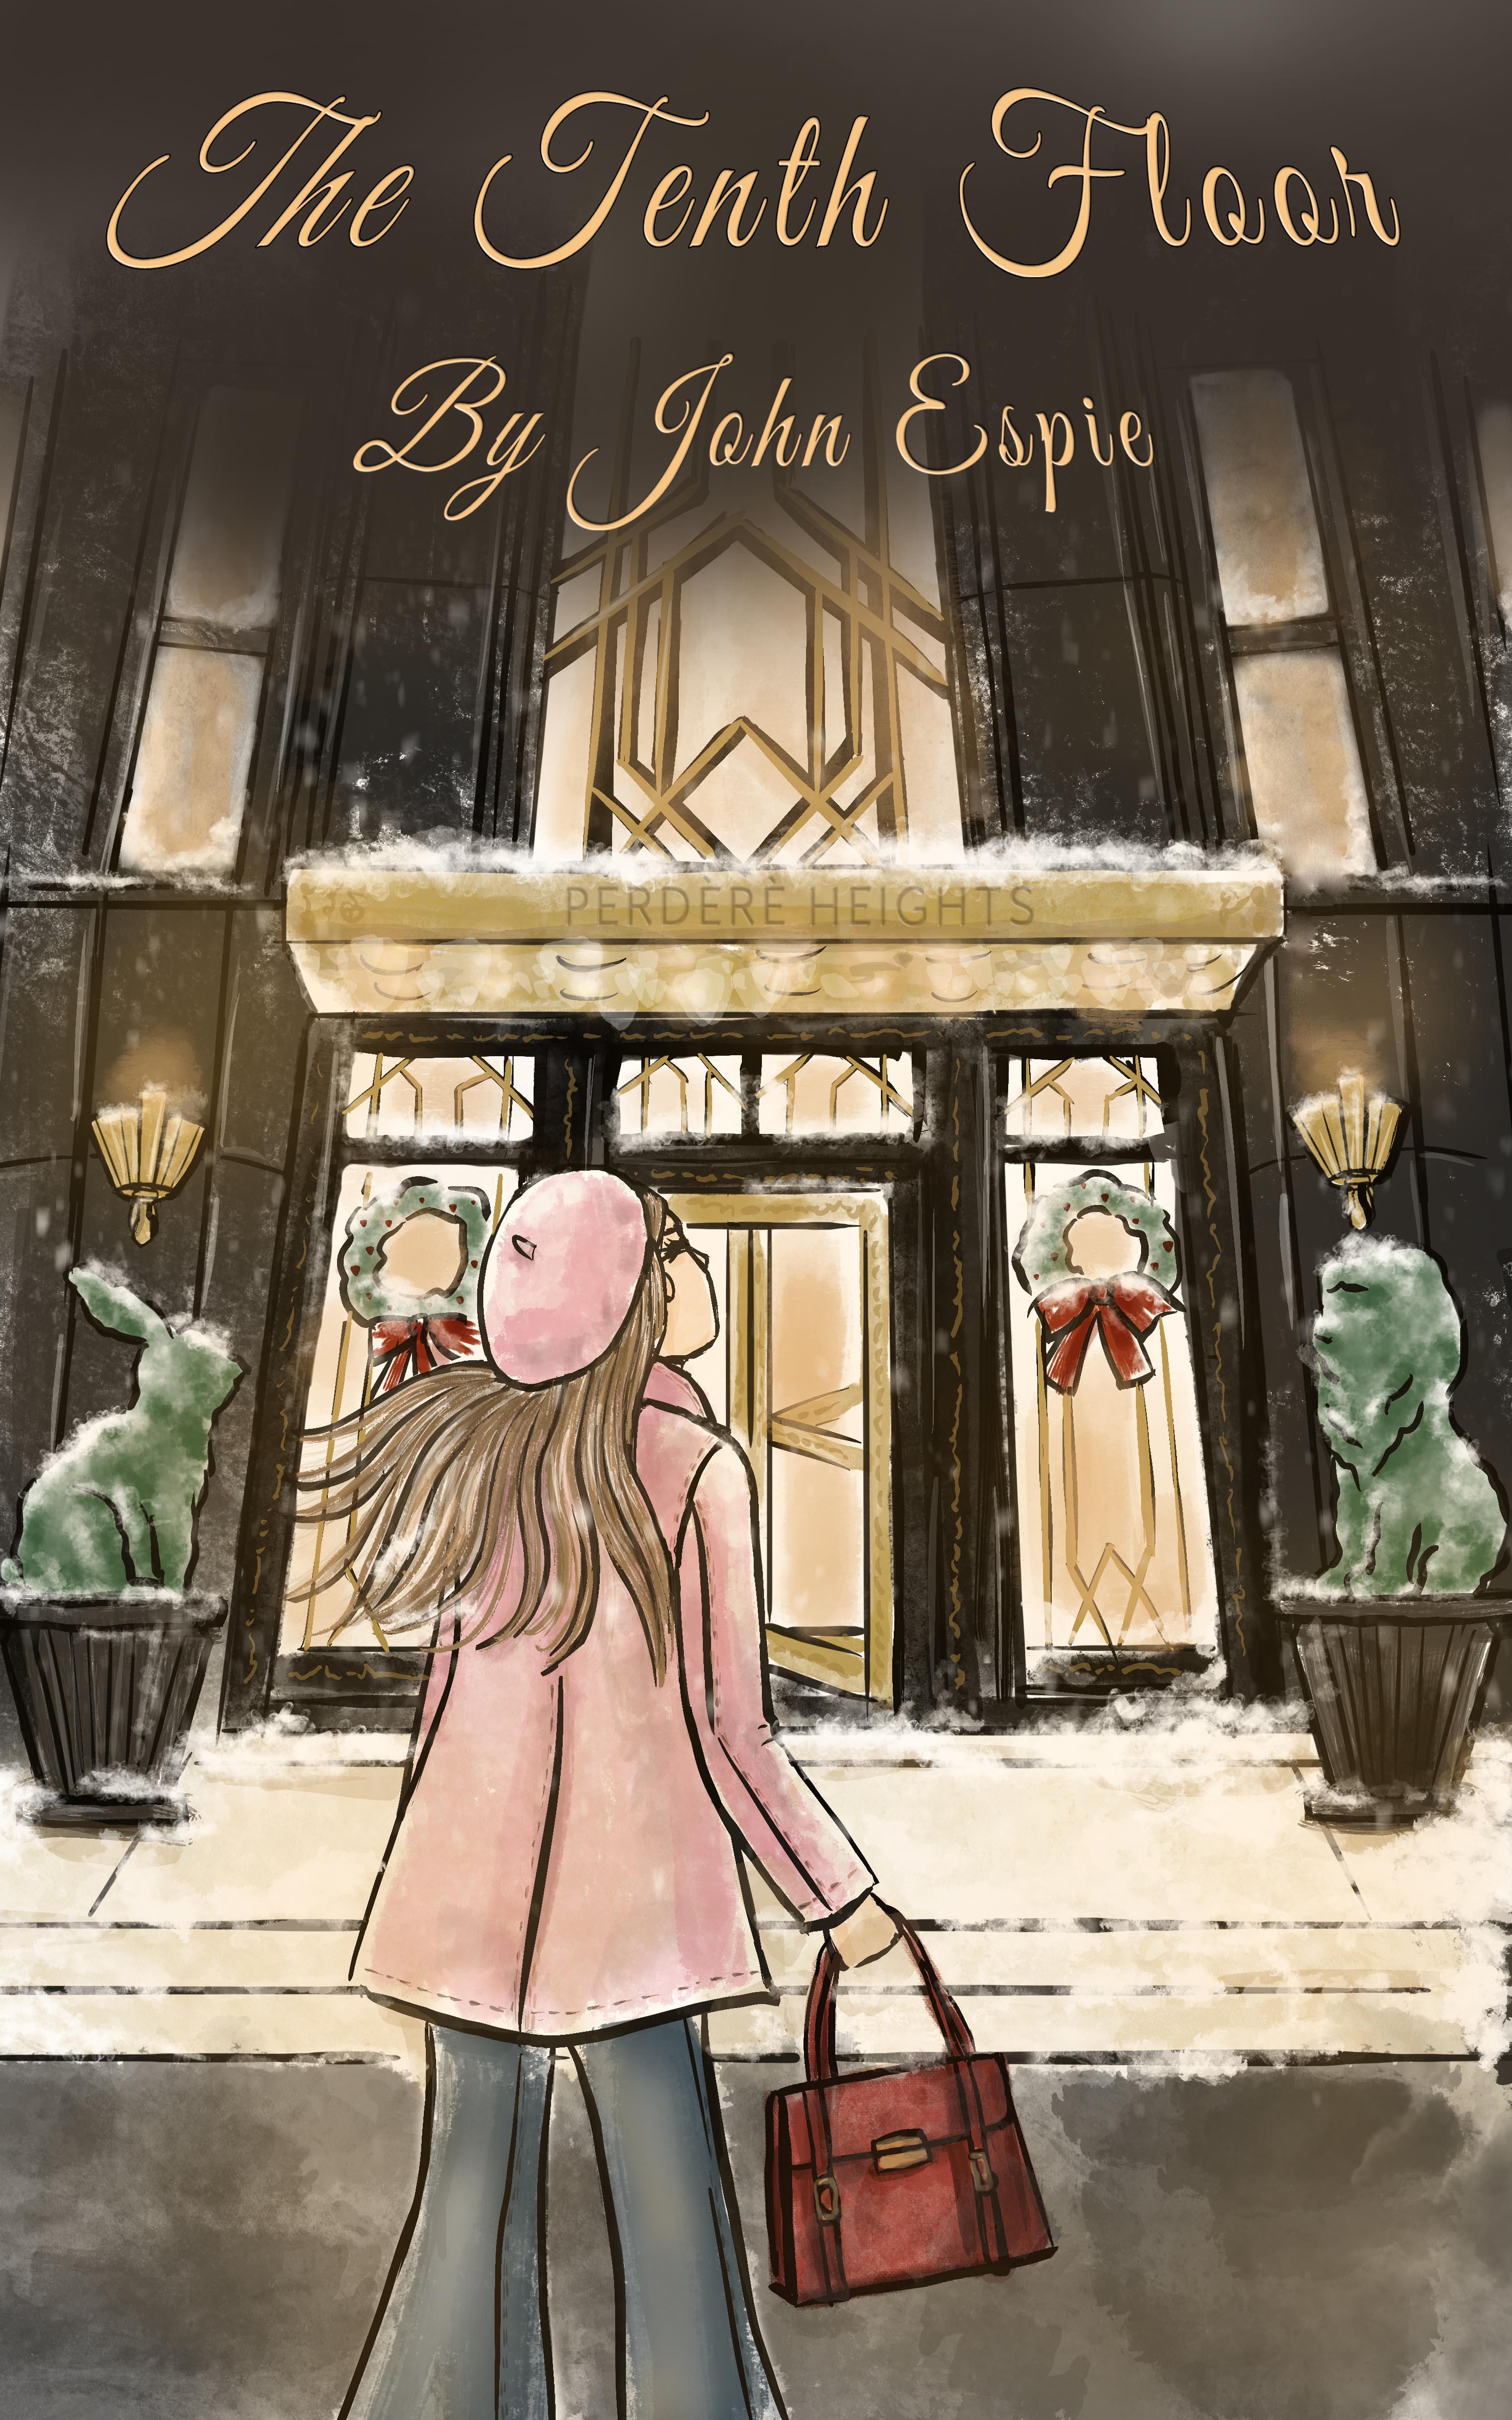 A little girl stands in front of an art deco building, peering upwards.